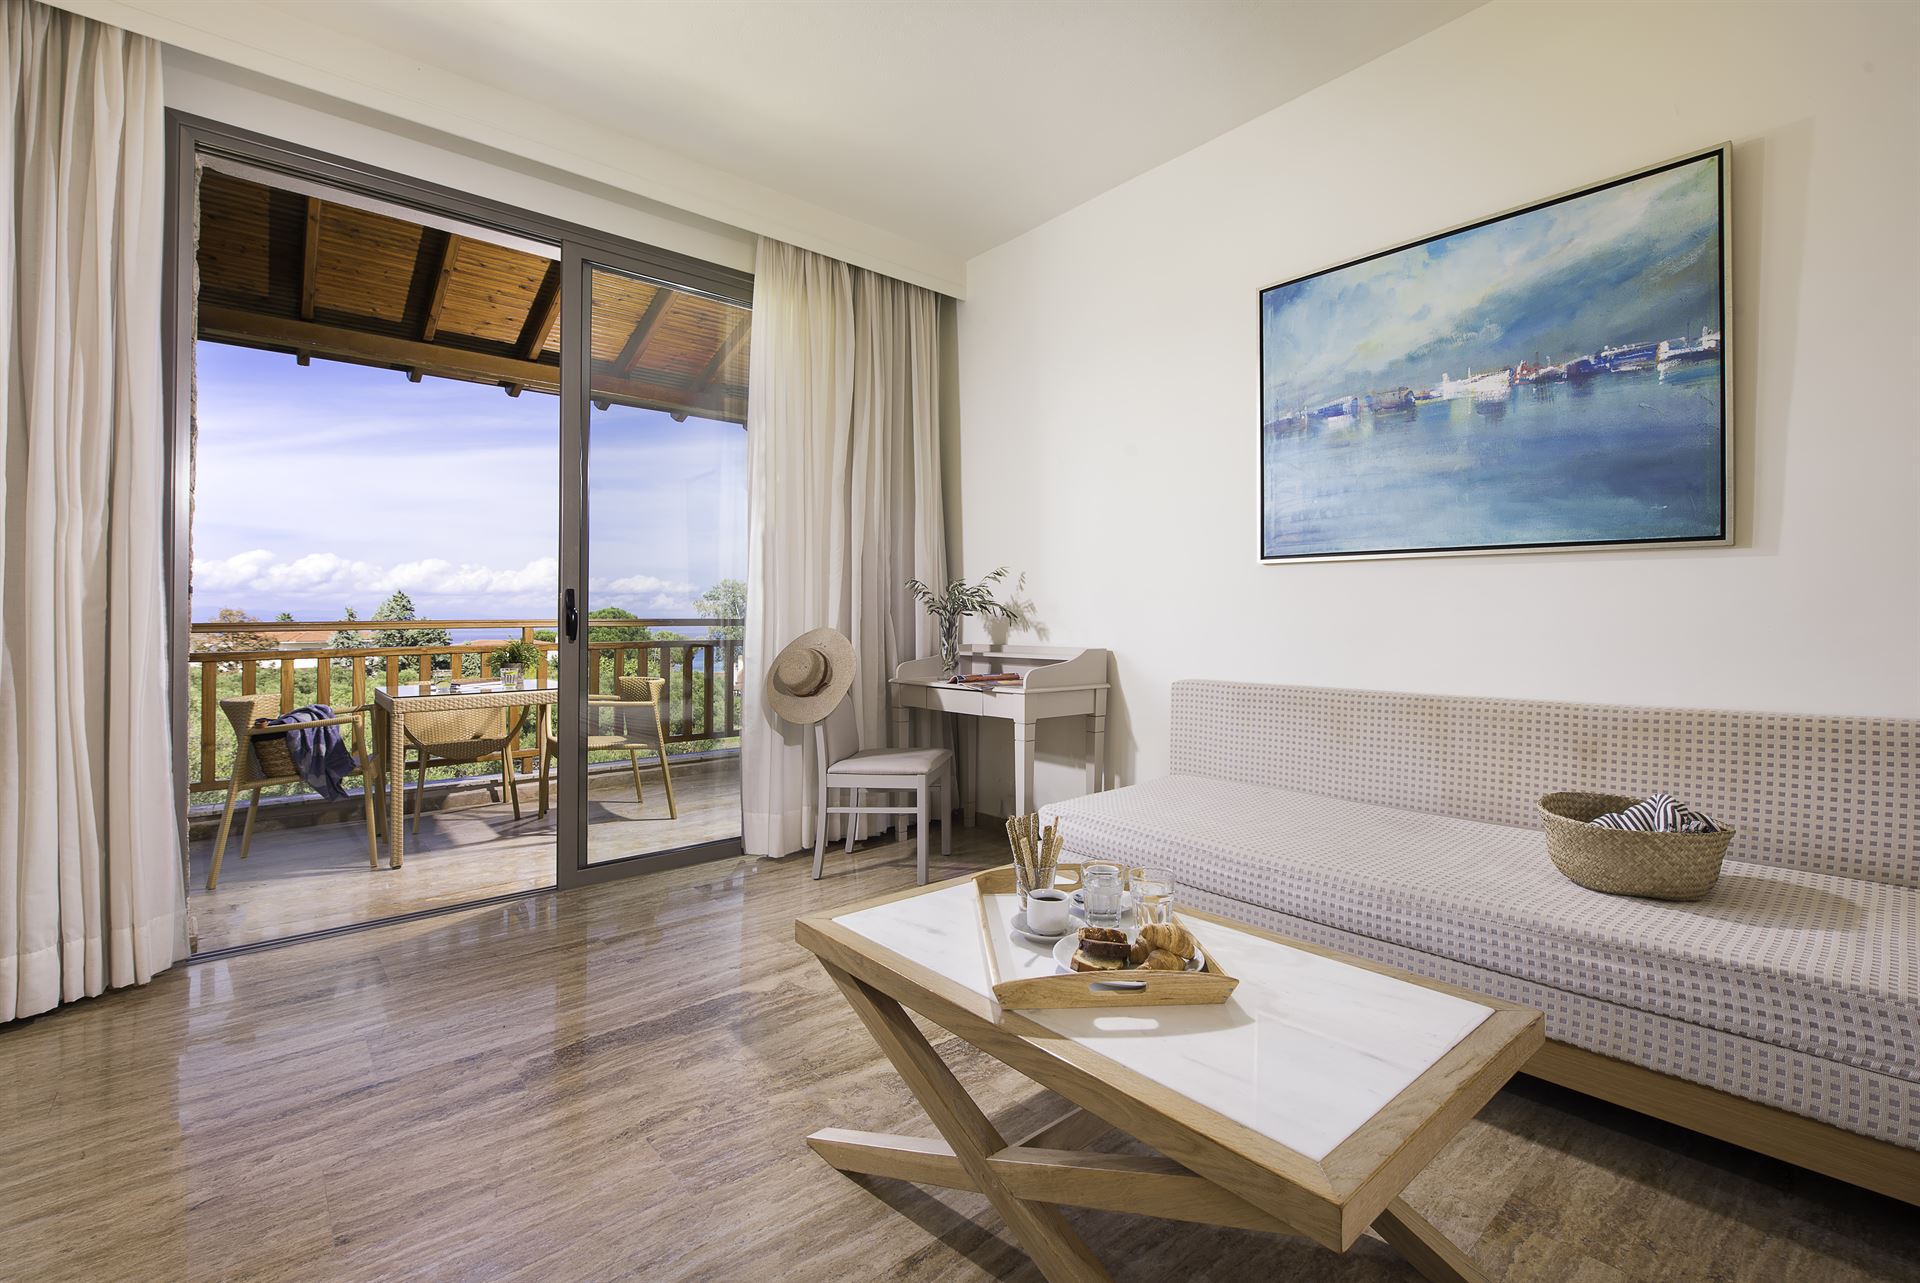 Kassandra Palace Hotel & Spa : Deluxe Suite SV